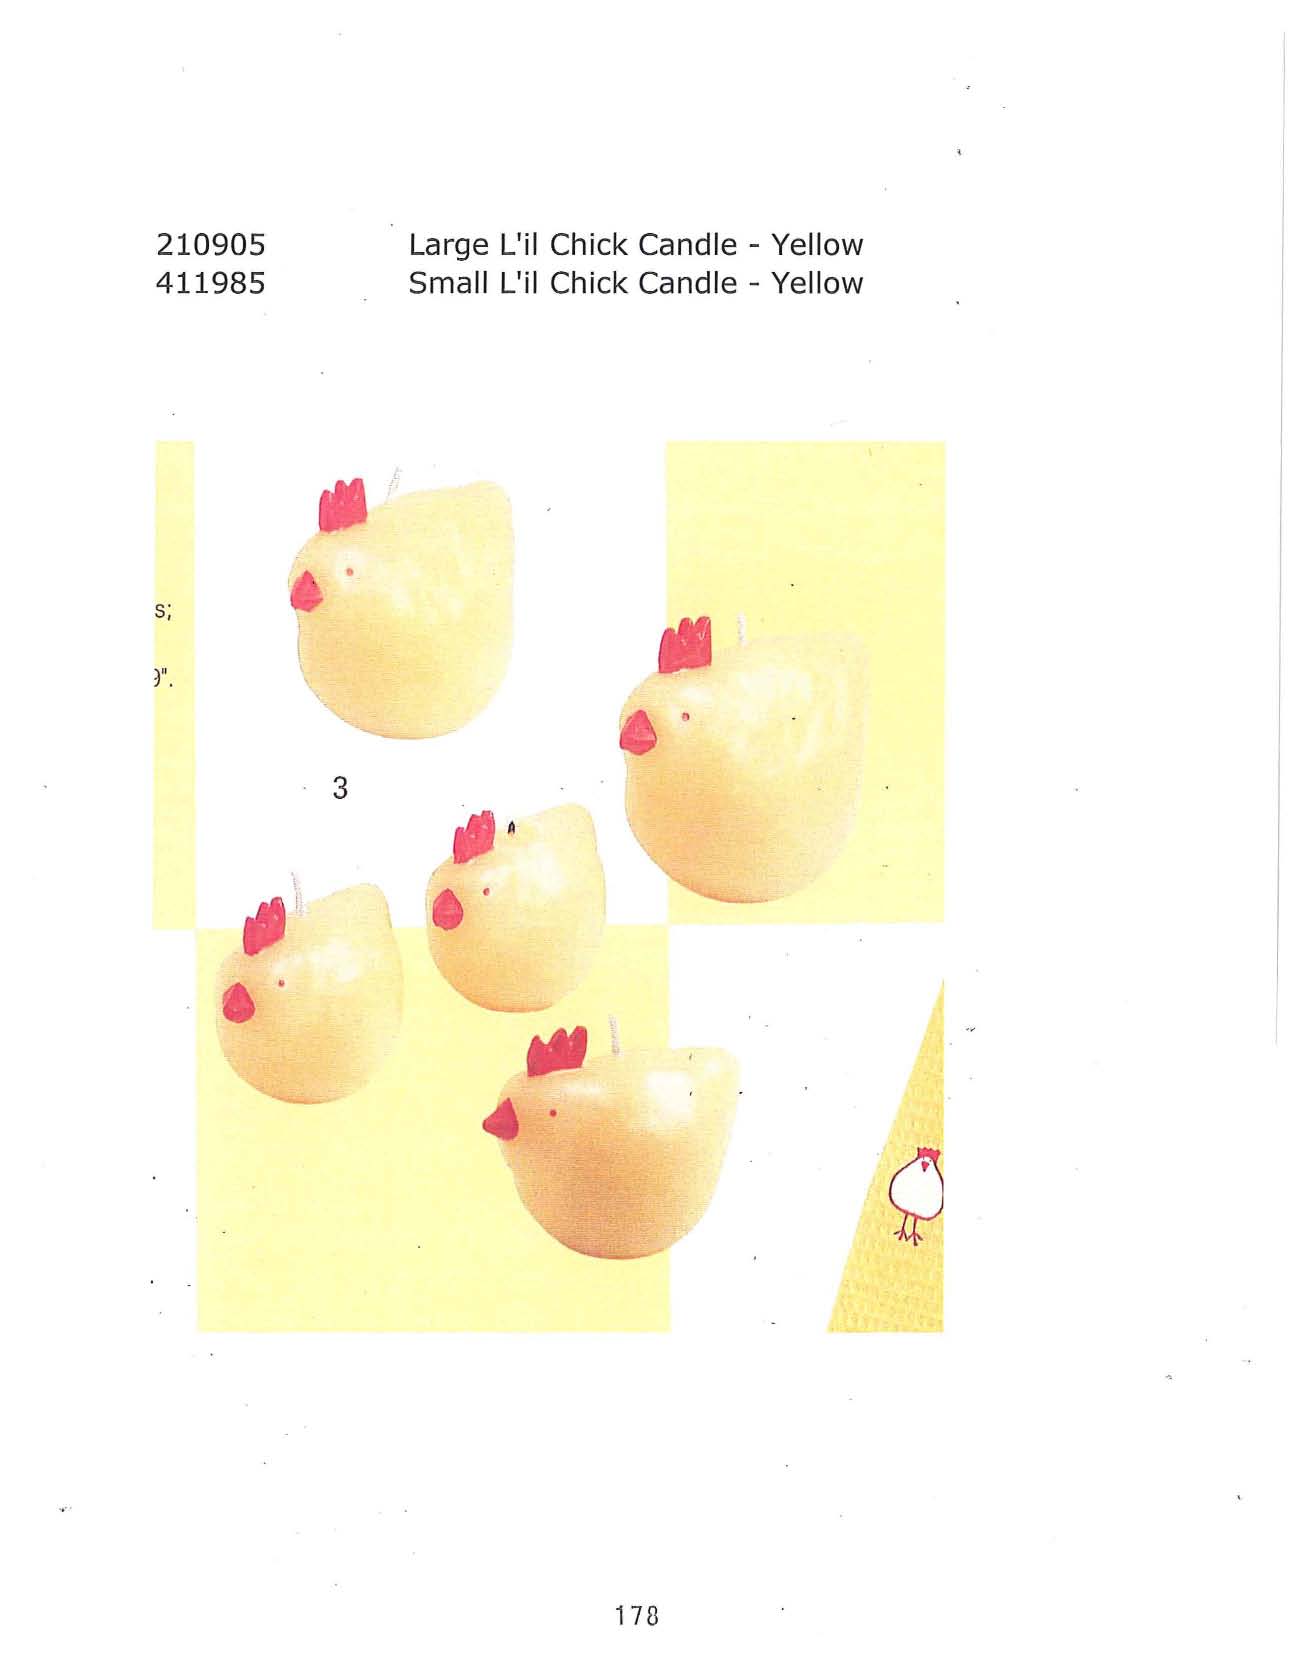 Large and Small L'il Chick Candle - Yellow